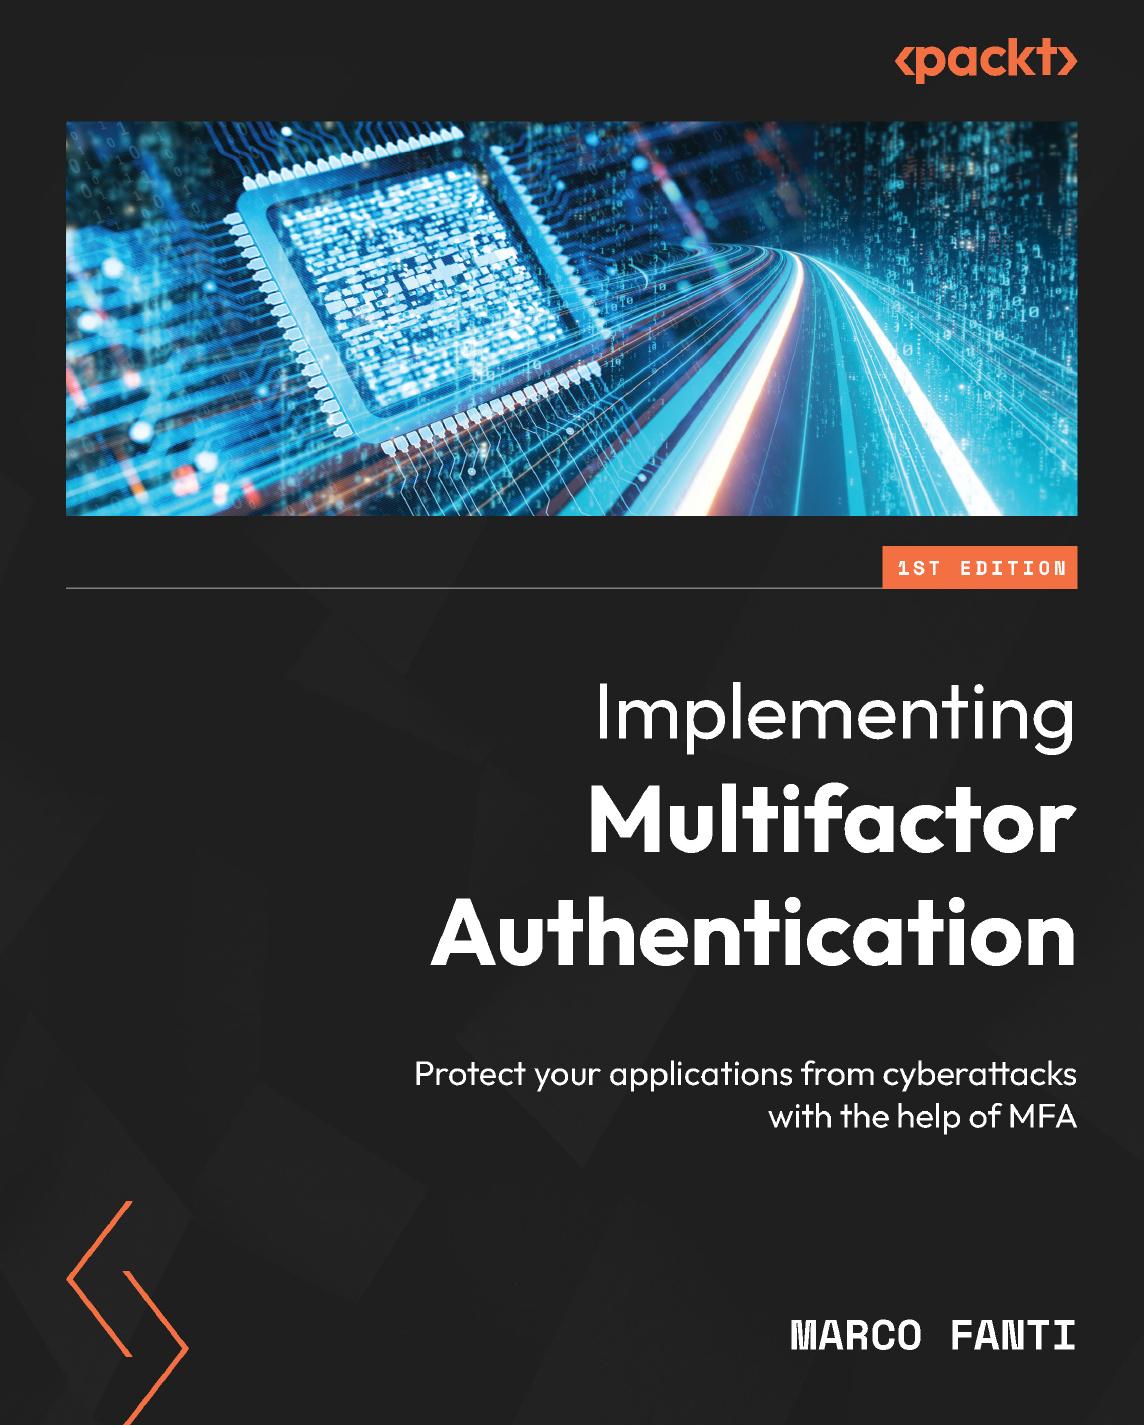 Implementing Multifactor Authentication: Protect your applications from cyberattacks with the help of MFA by Marco Fanti